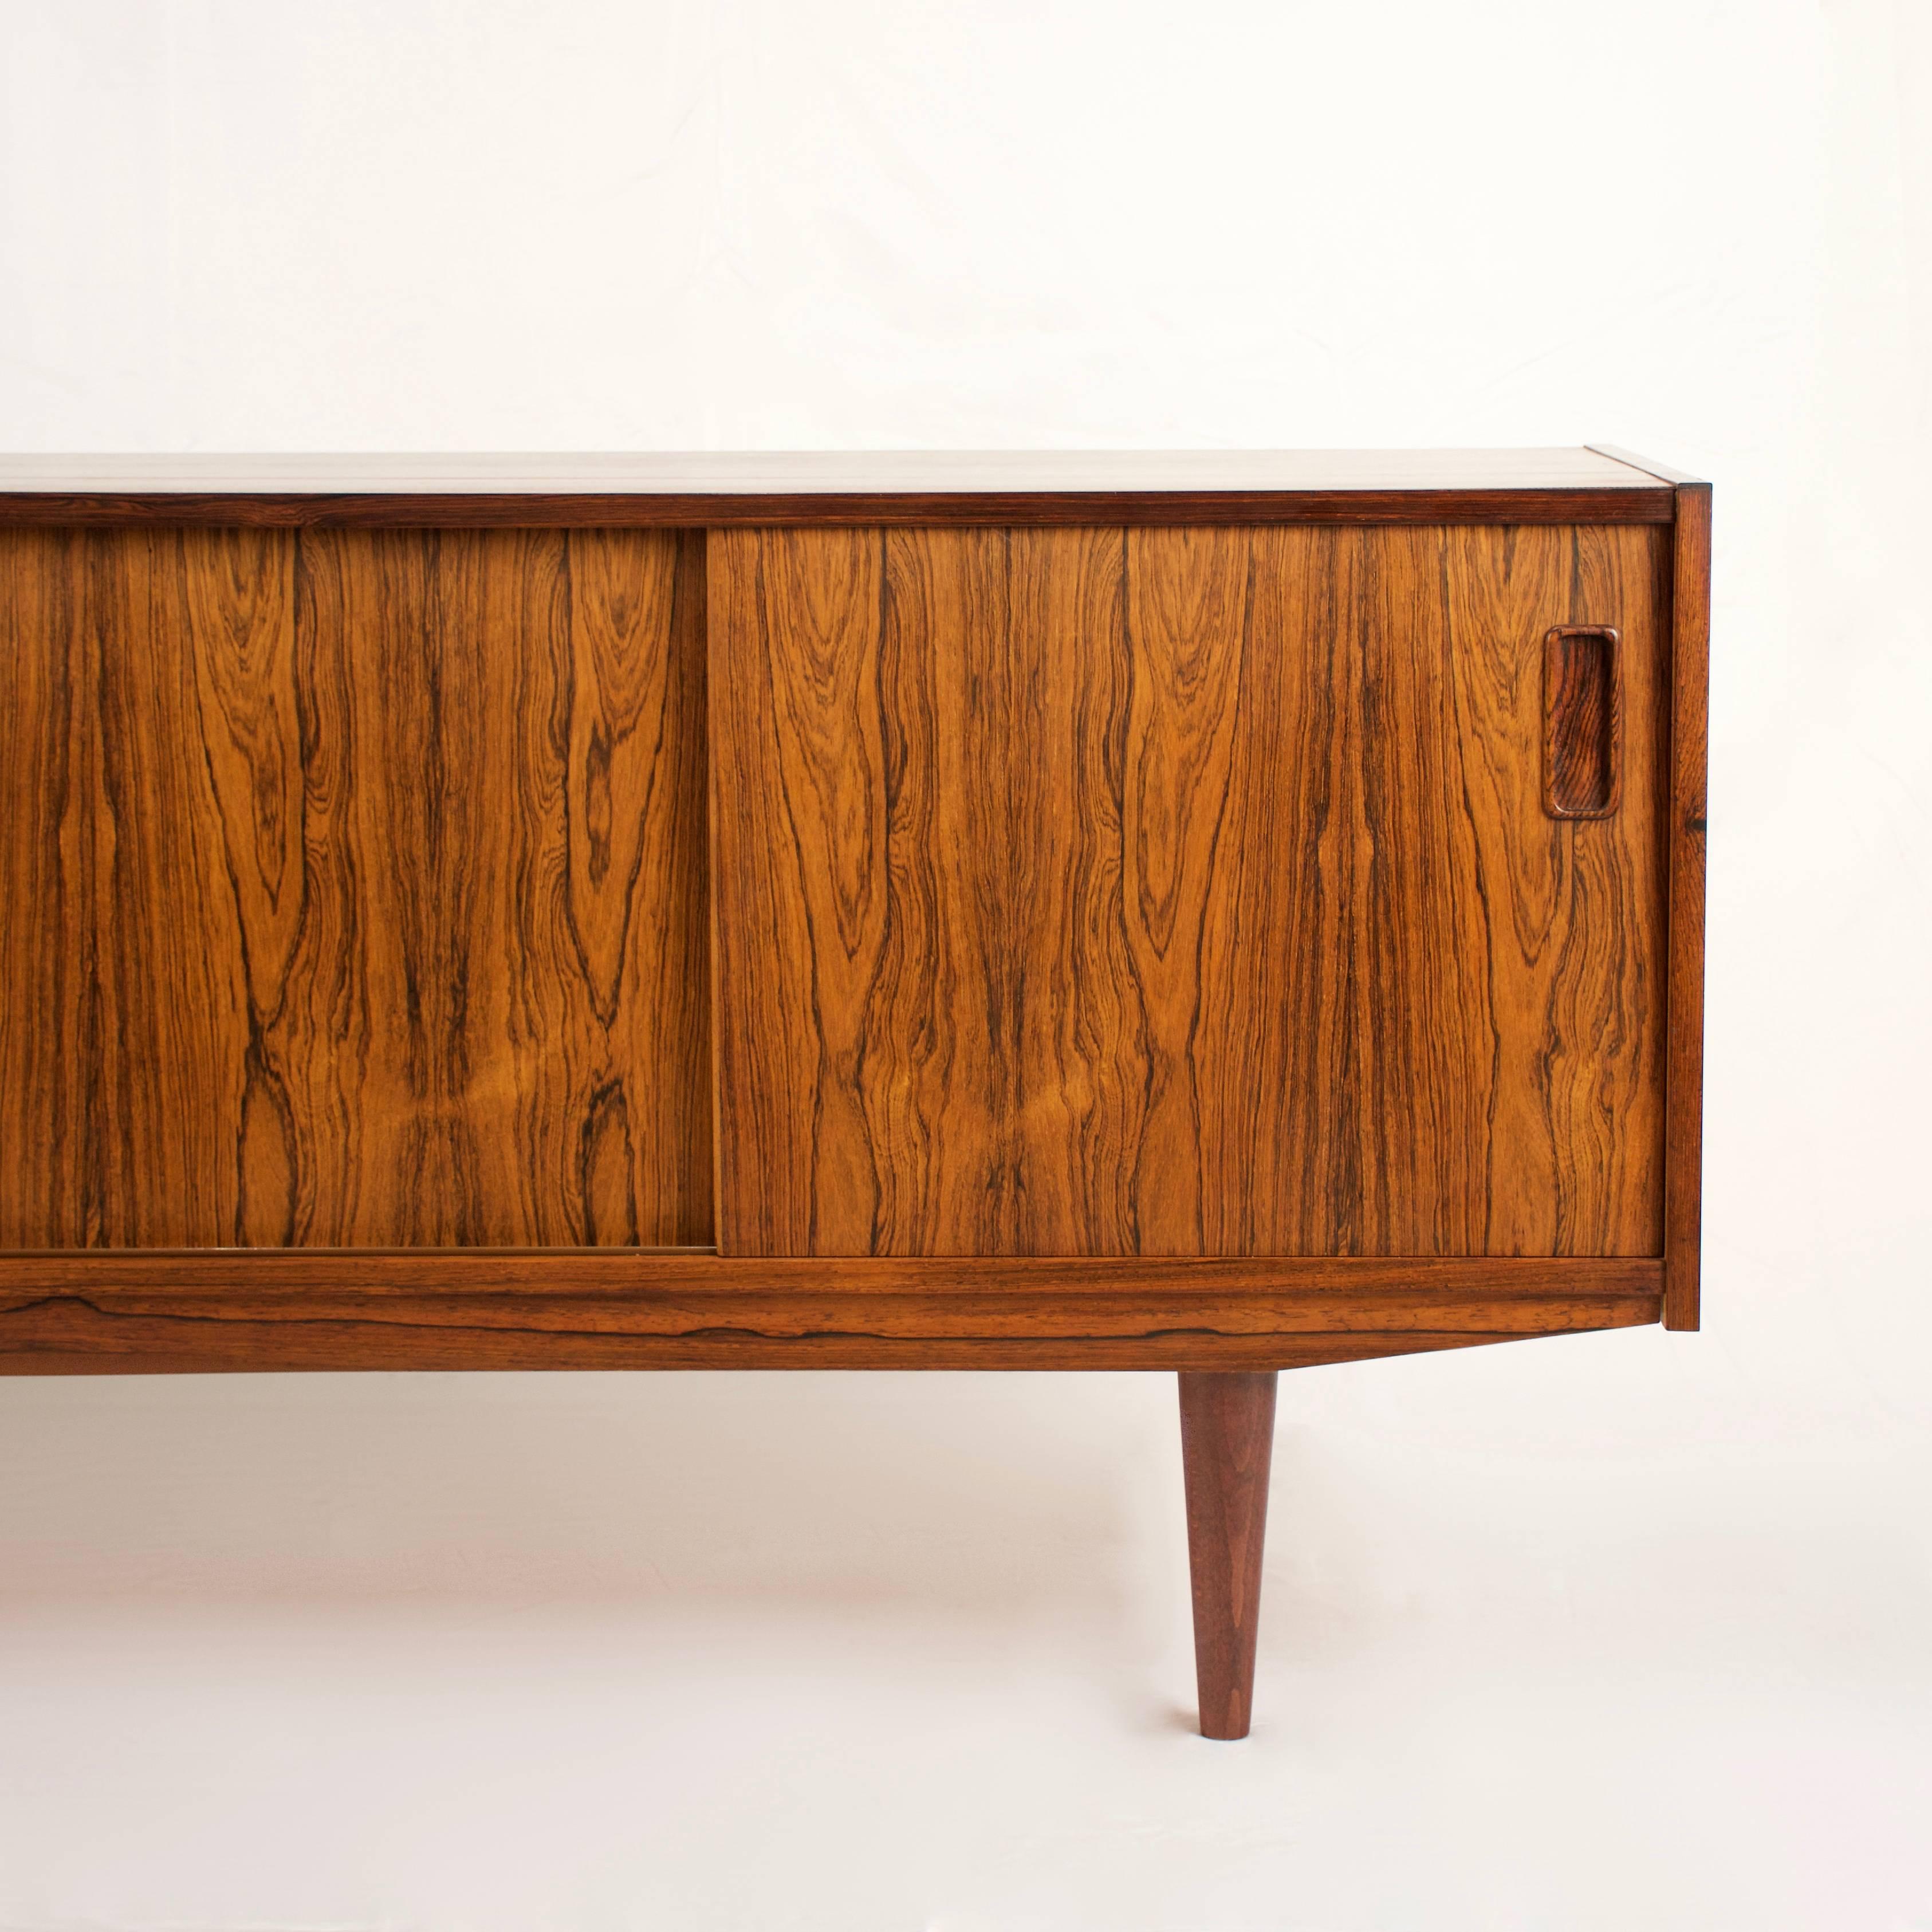 Beautiful vintage Danish rosewood sideboard. This piece features four sliding doors with inset rectangular pulls. These doors open onto a storage space with adjustable shelves and removable trays. Made in Denmark.